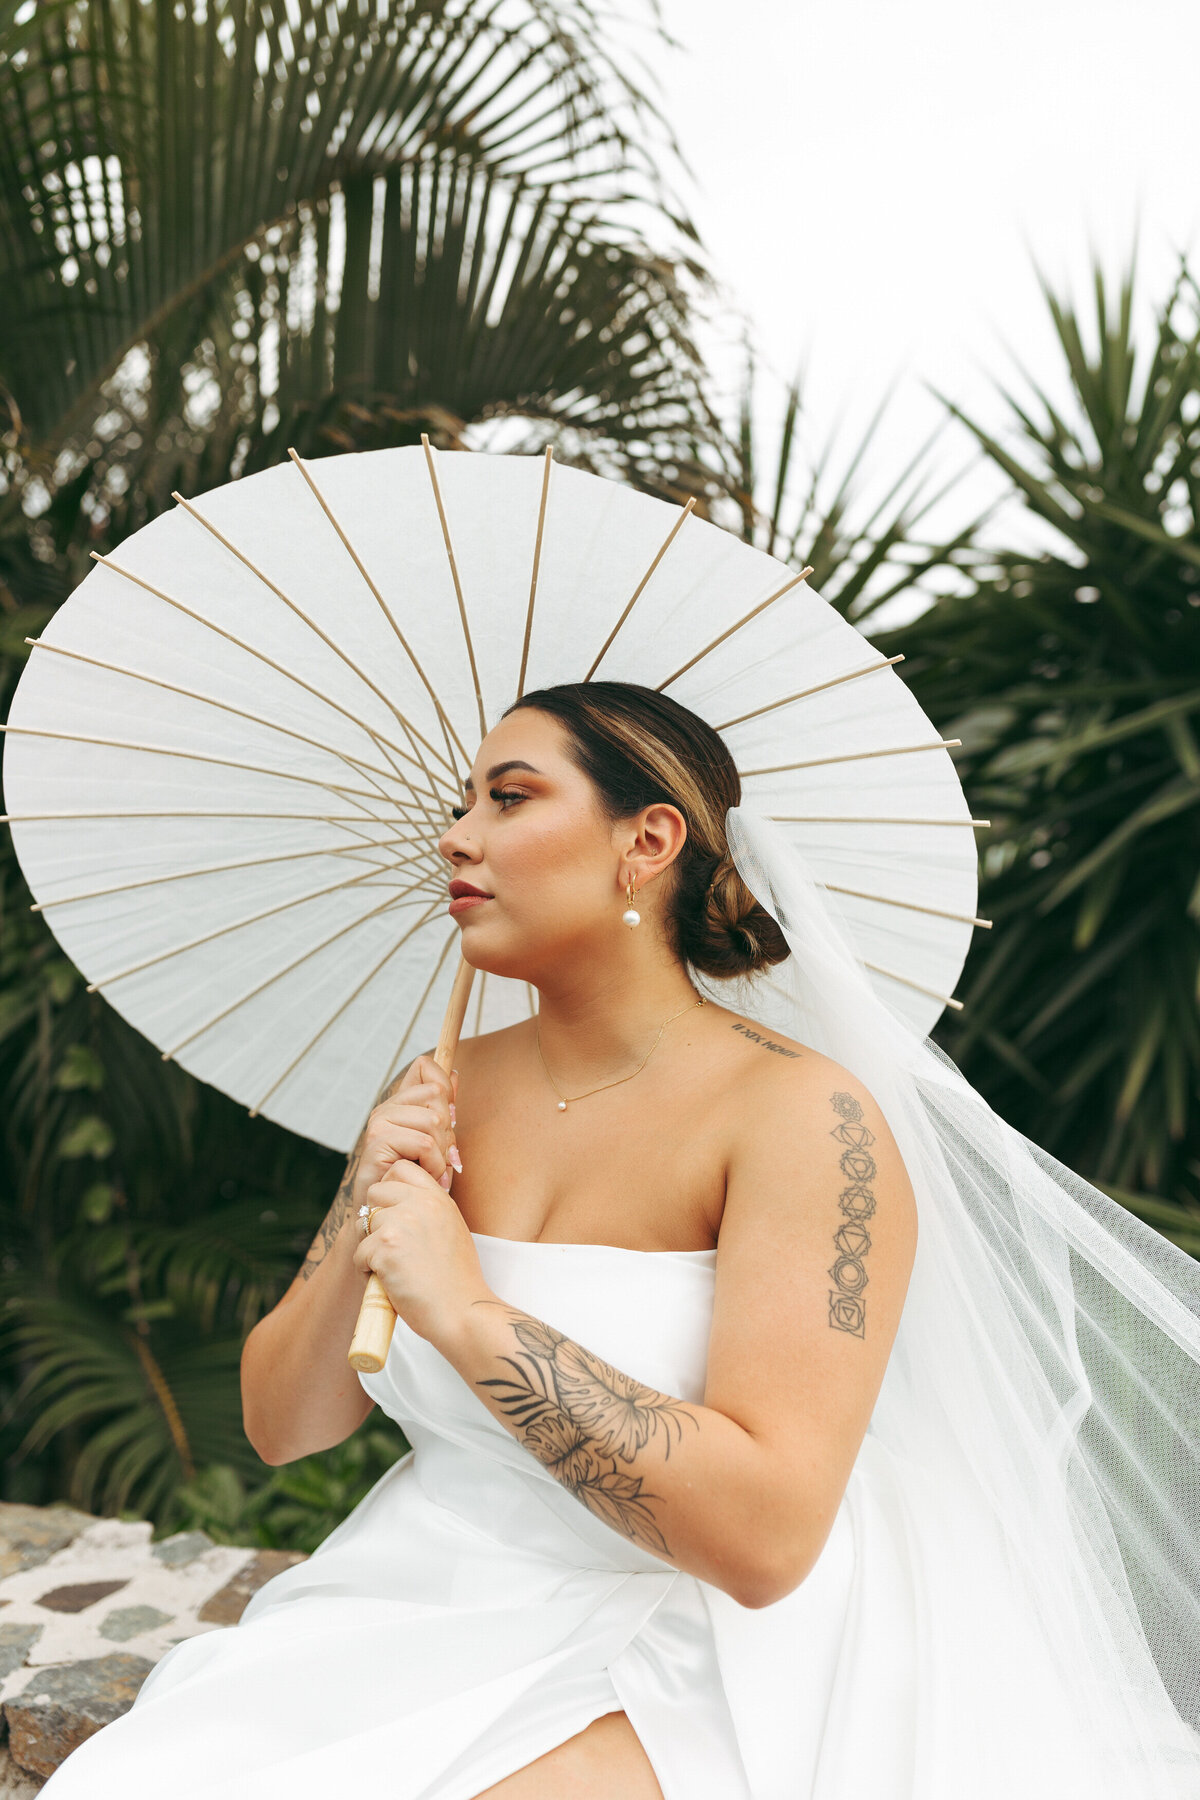 Bride with a parasol looking over her shoulder, her tattooed arm and the details of her white gown highlighted against the greenery